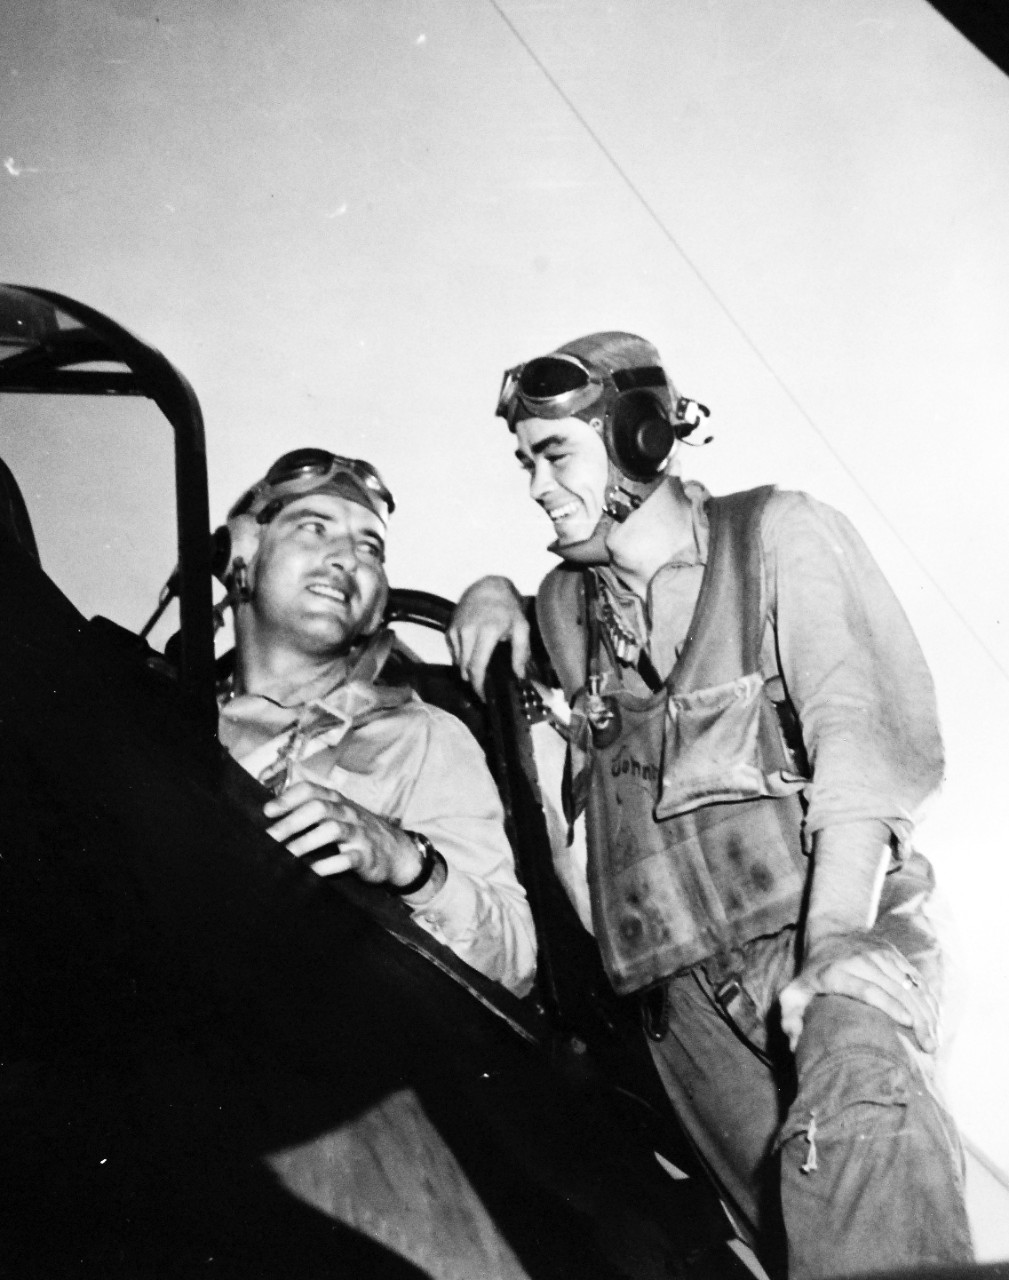 80-G-285082:  Battle of the Sibuyan Sea, October 24, 1944.   Lieutenant Commander Arthur L. Downing and ARM2 John L. Carver following their return to carrier after successful bombing of Japanese battleship Yamato during the Battle of Leyte Gulf. In an SB2C, they dropped two bombs just forward of No.1 gun turret, going in through intense anti-aircraft fire at low altitude.  Left to right:  ARM2C Carver and Lieutenant Commander Downing.  This bombing was probably from aircraft based onboard USS Essex (CV-9).   Yamato was later sunk by U.S. Navy aircraft on April 7, 1945.   Photograph released October 25, 1944.  U.S. Navy photograph, now in the collections of the National Archives.  (2016/03/15). 